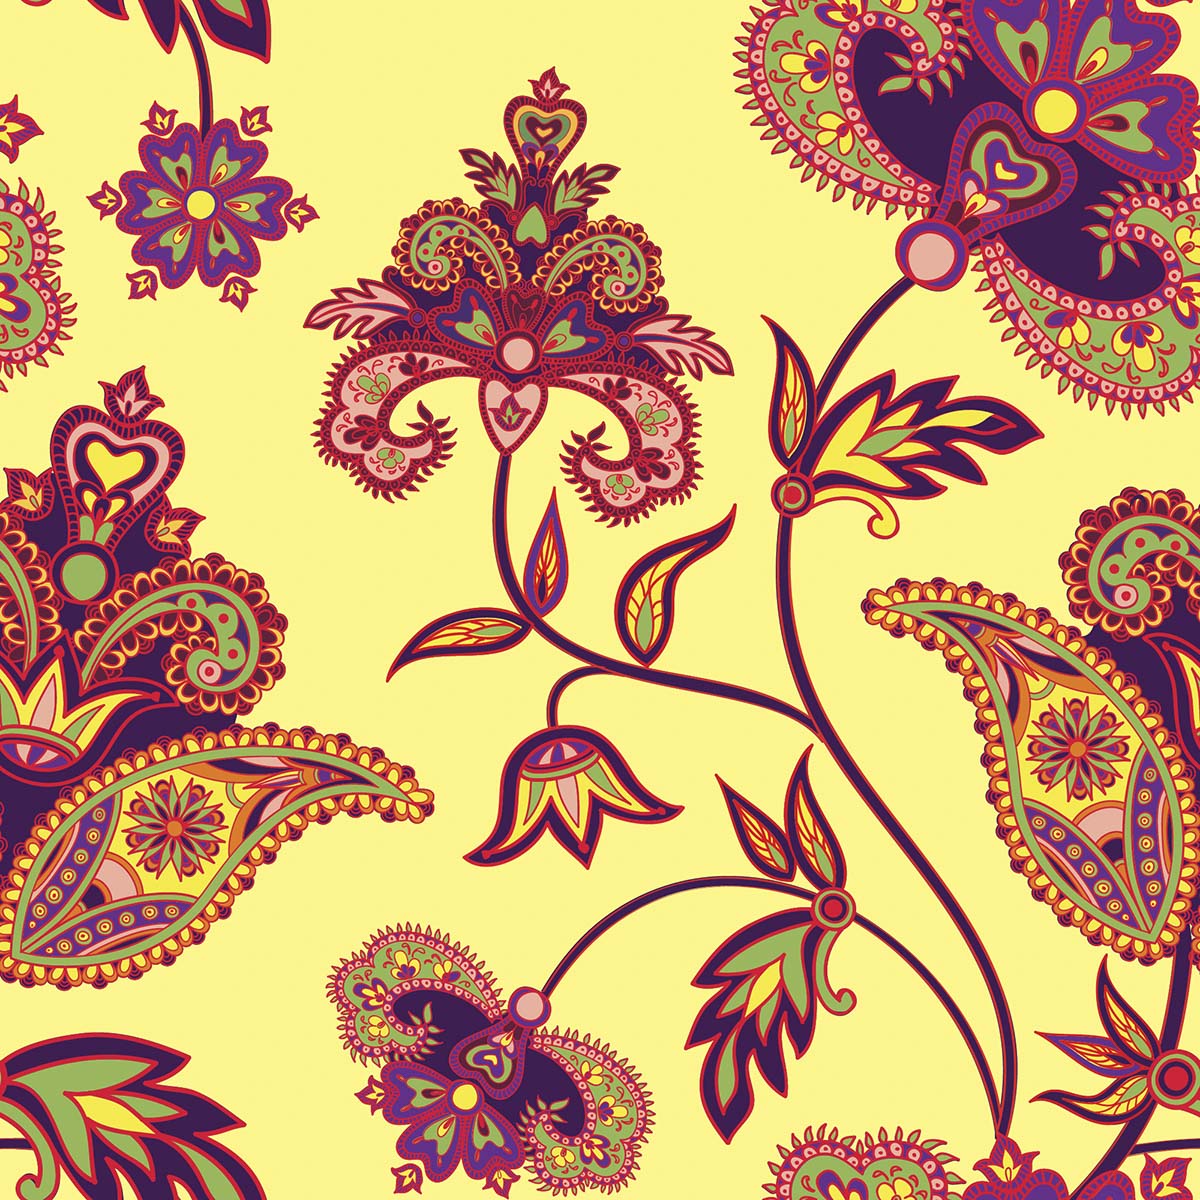 A colorful floral pattern on a yellow background